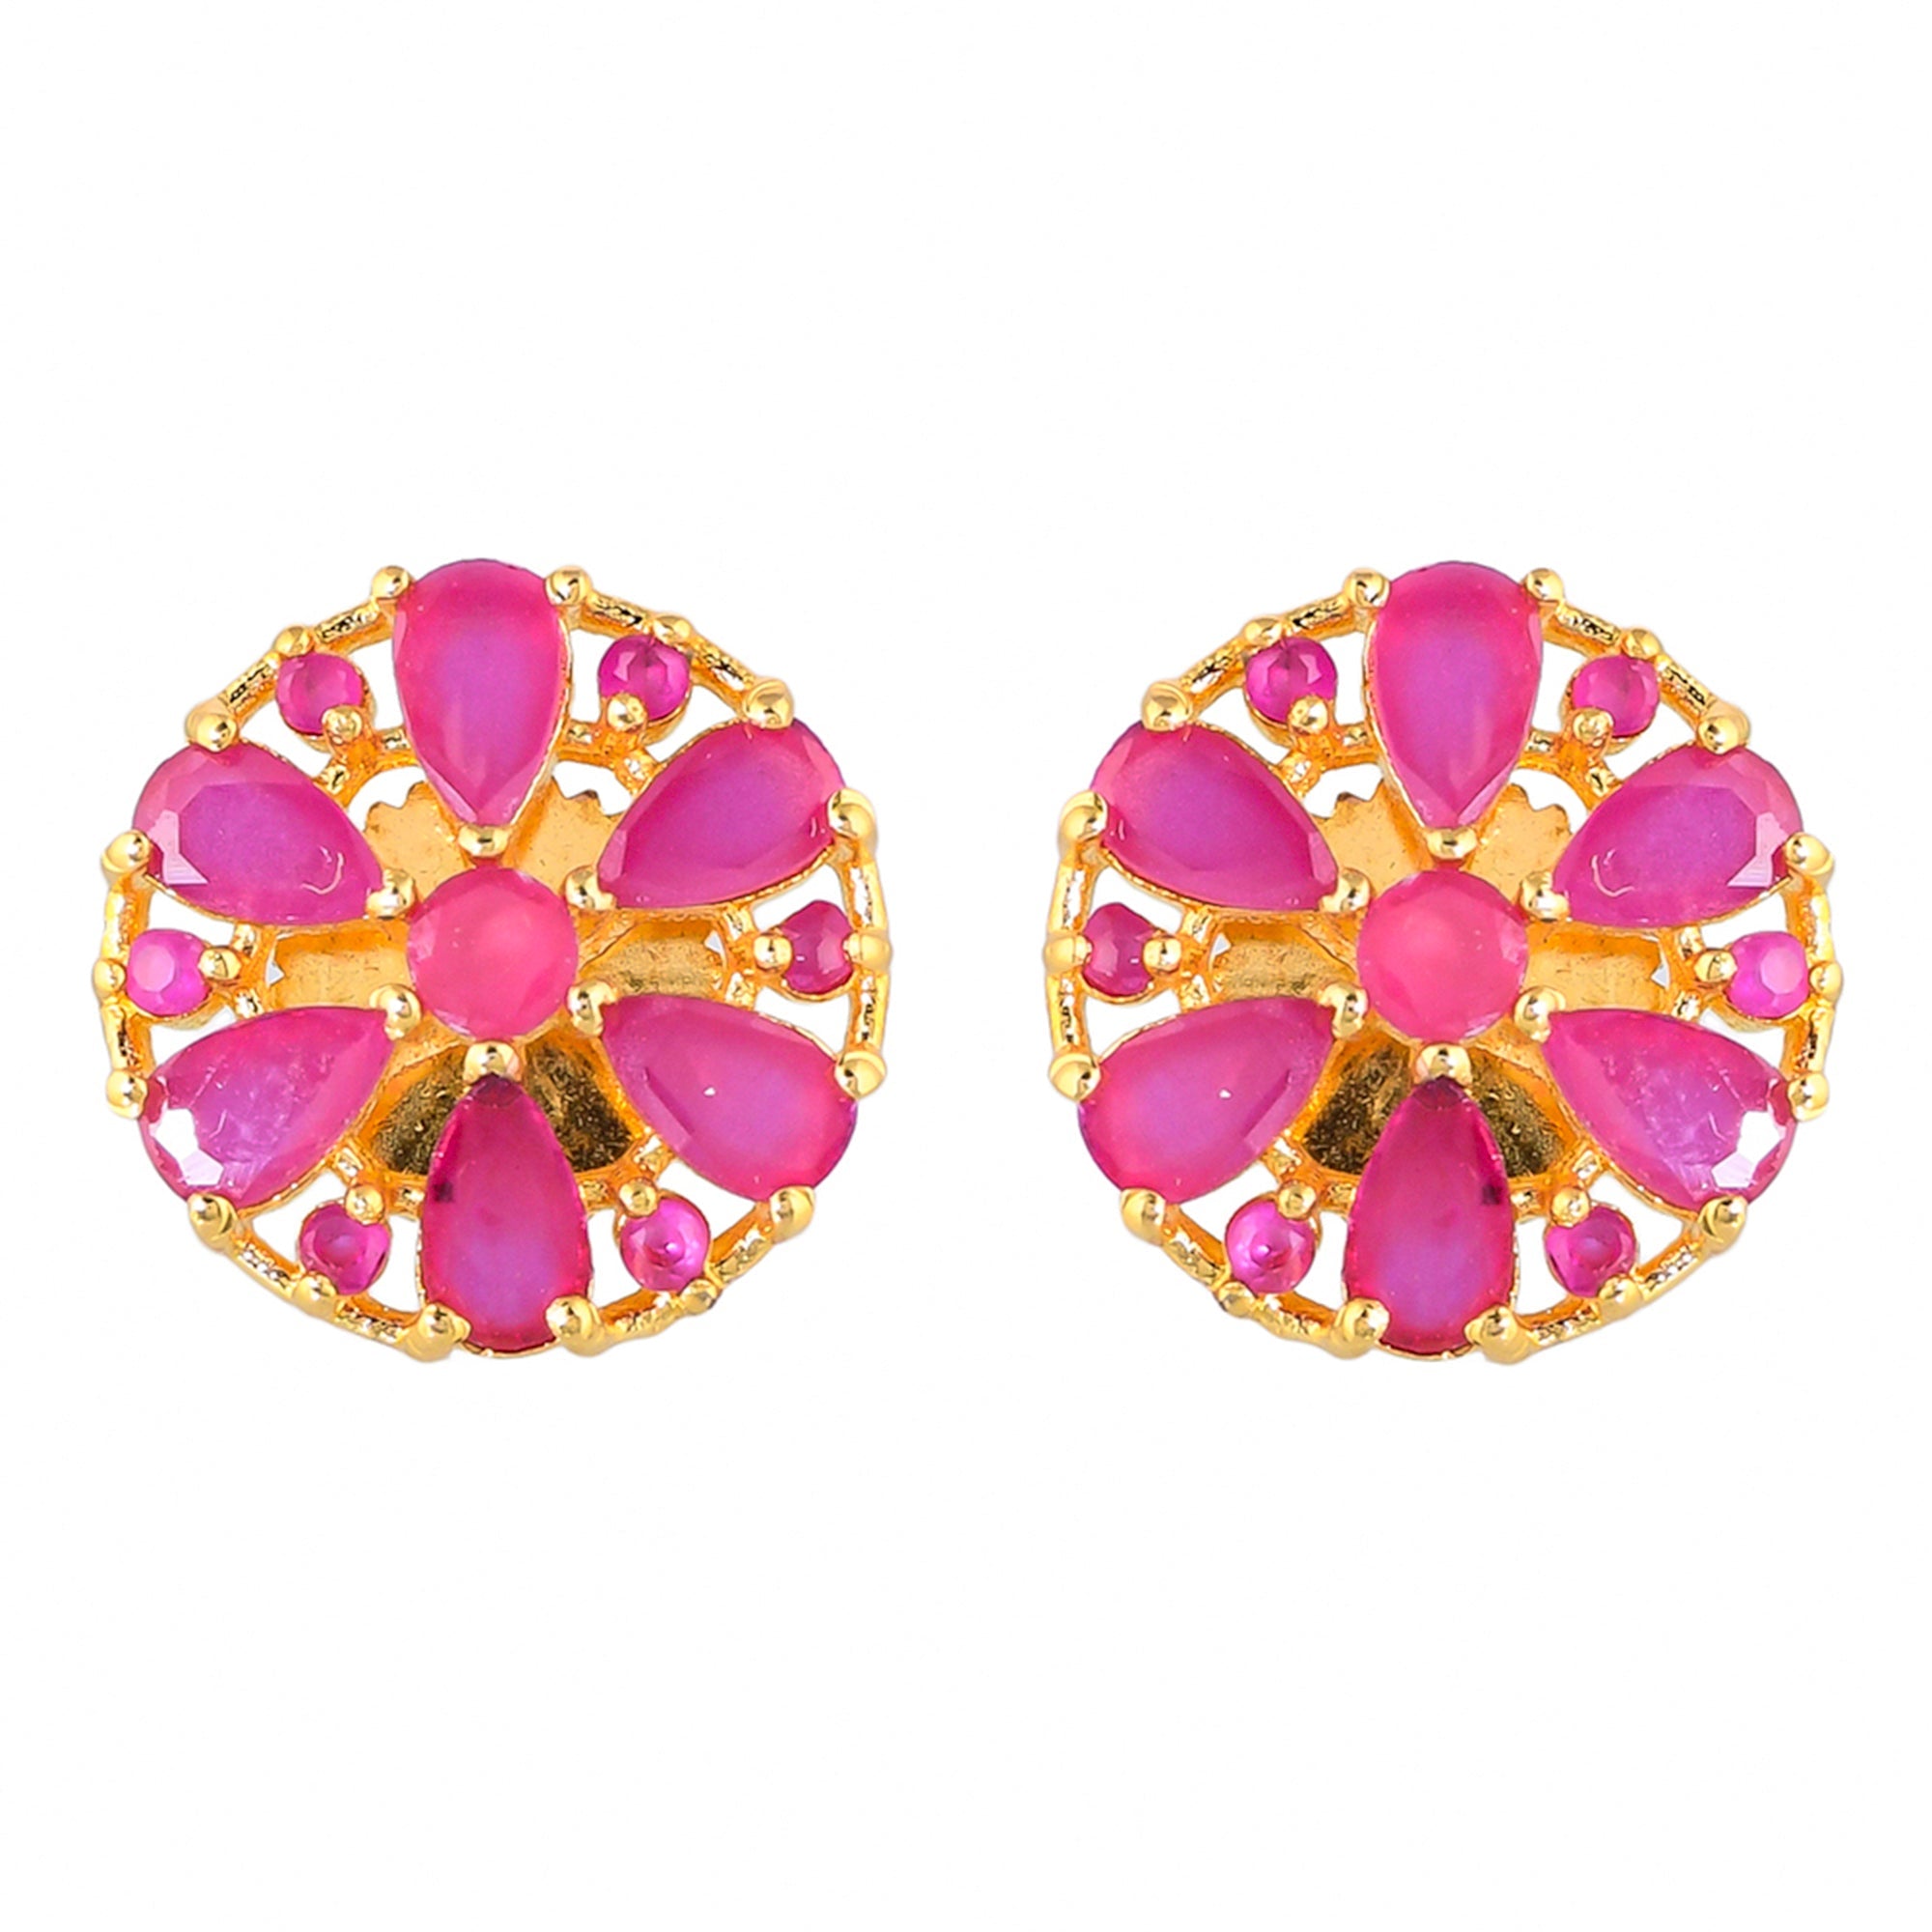 Women's Gold Plated Teardrop And Round Cut Pink Cz Stud Earrings - Voylla